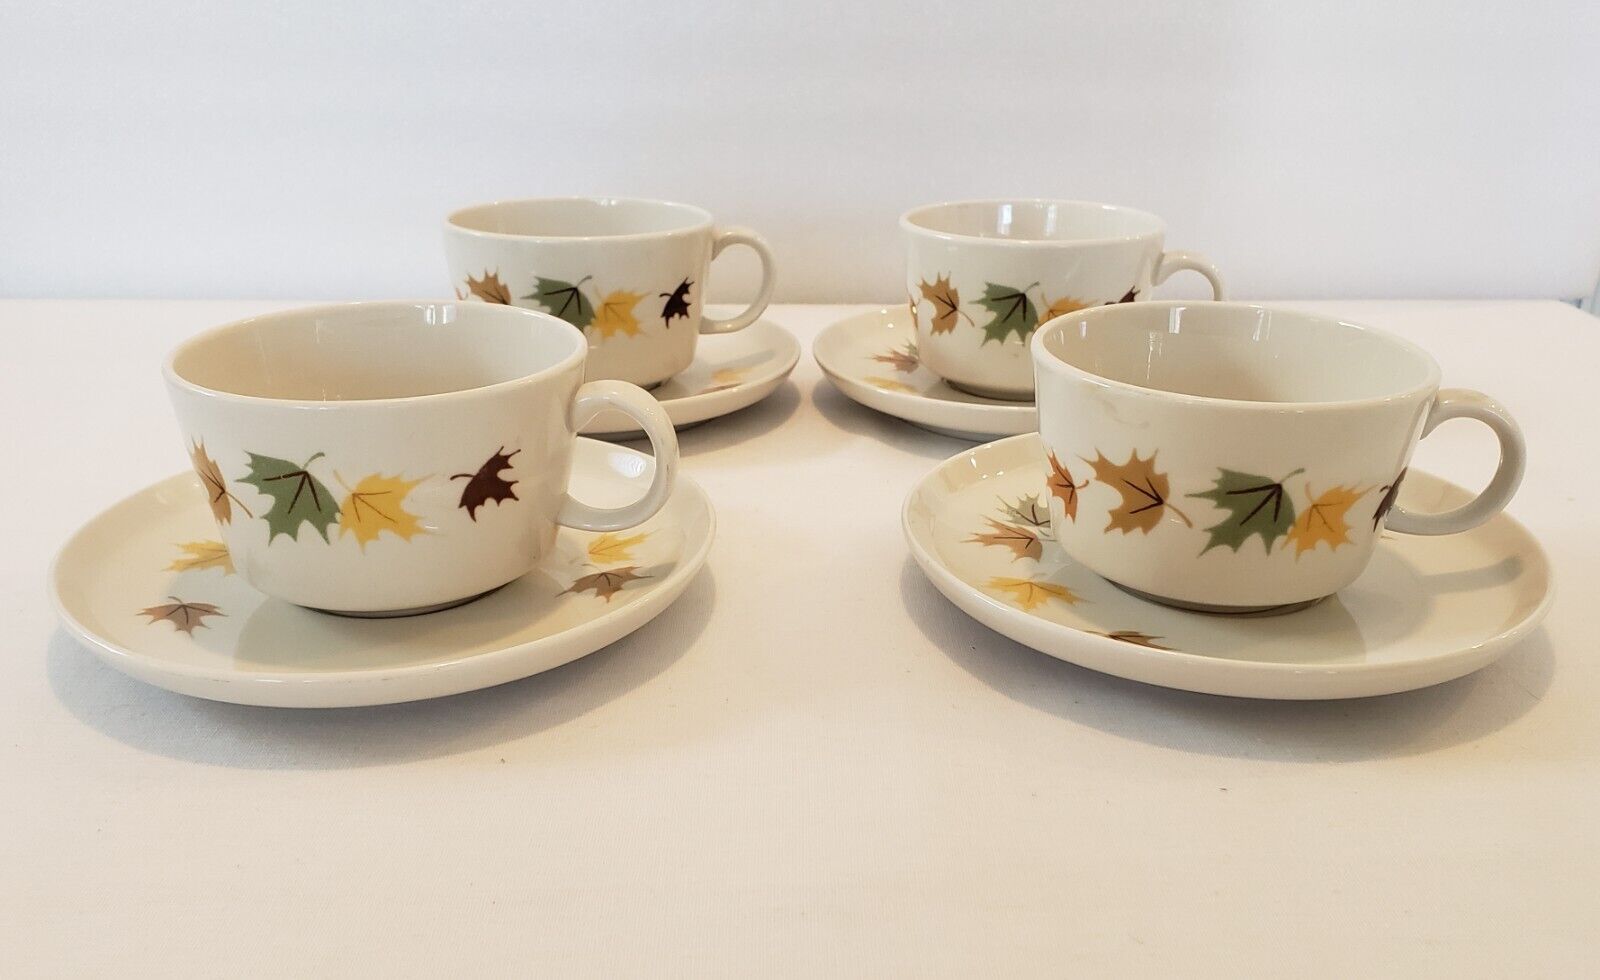 4 Vintage Franciscan Usa Indian Summer Cups And Saucers Yellow Tan Green Leaves